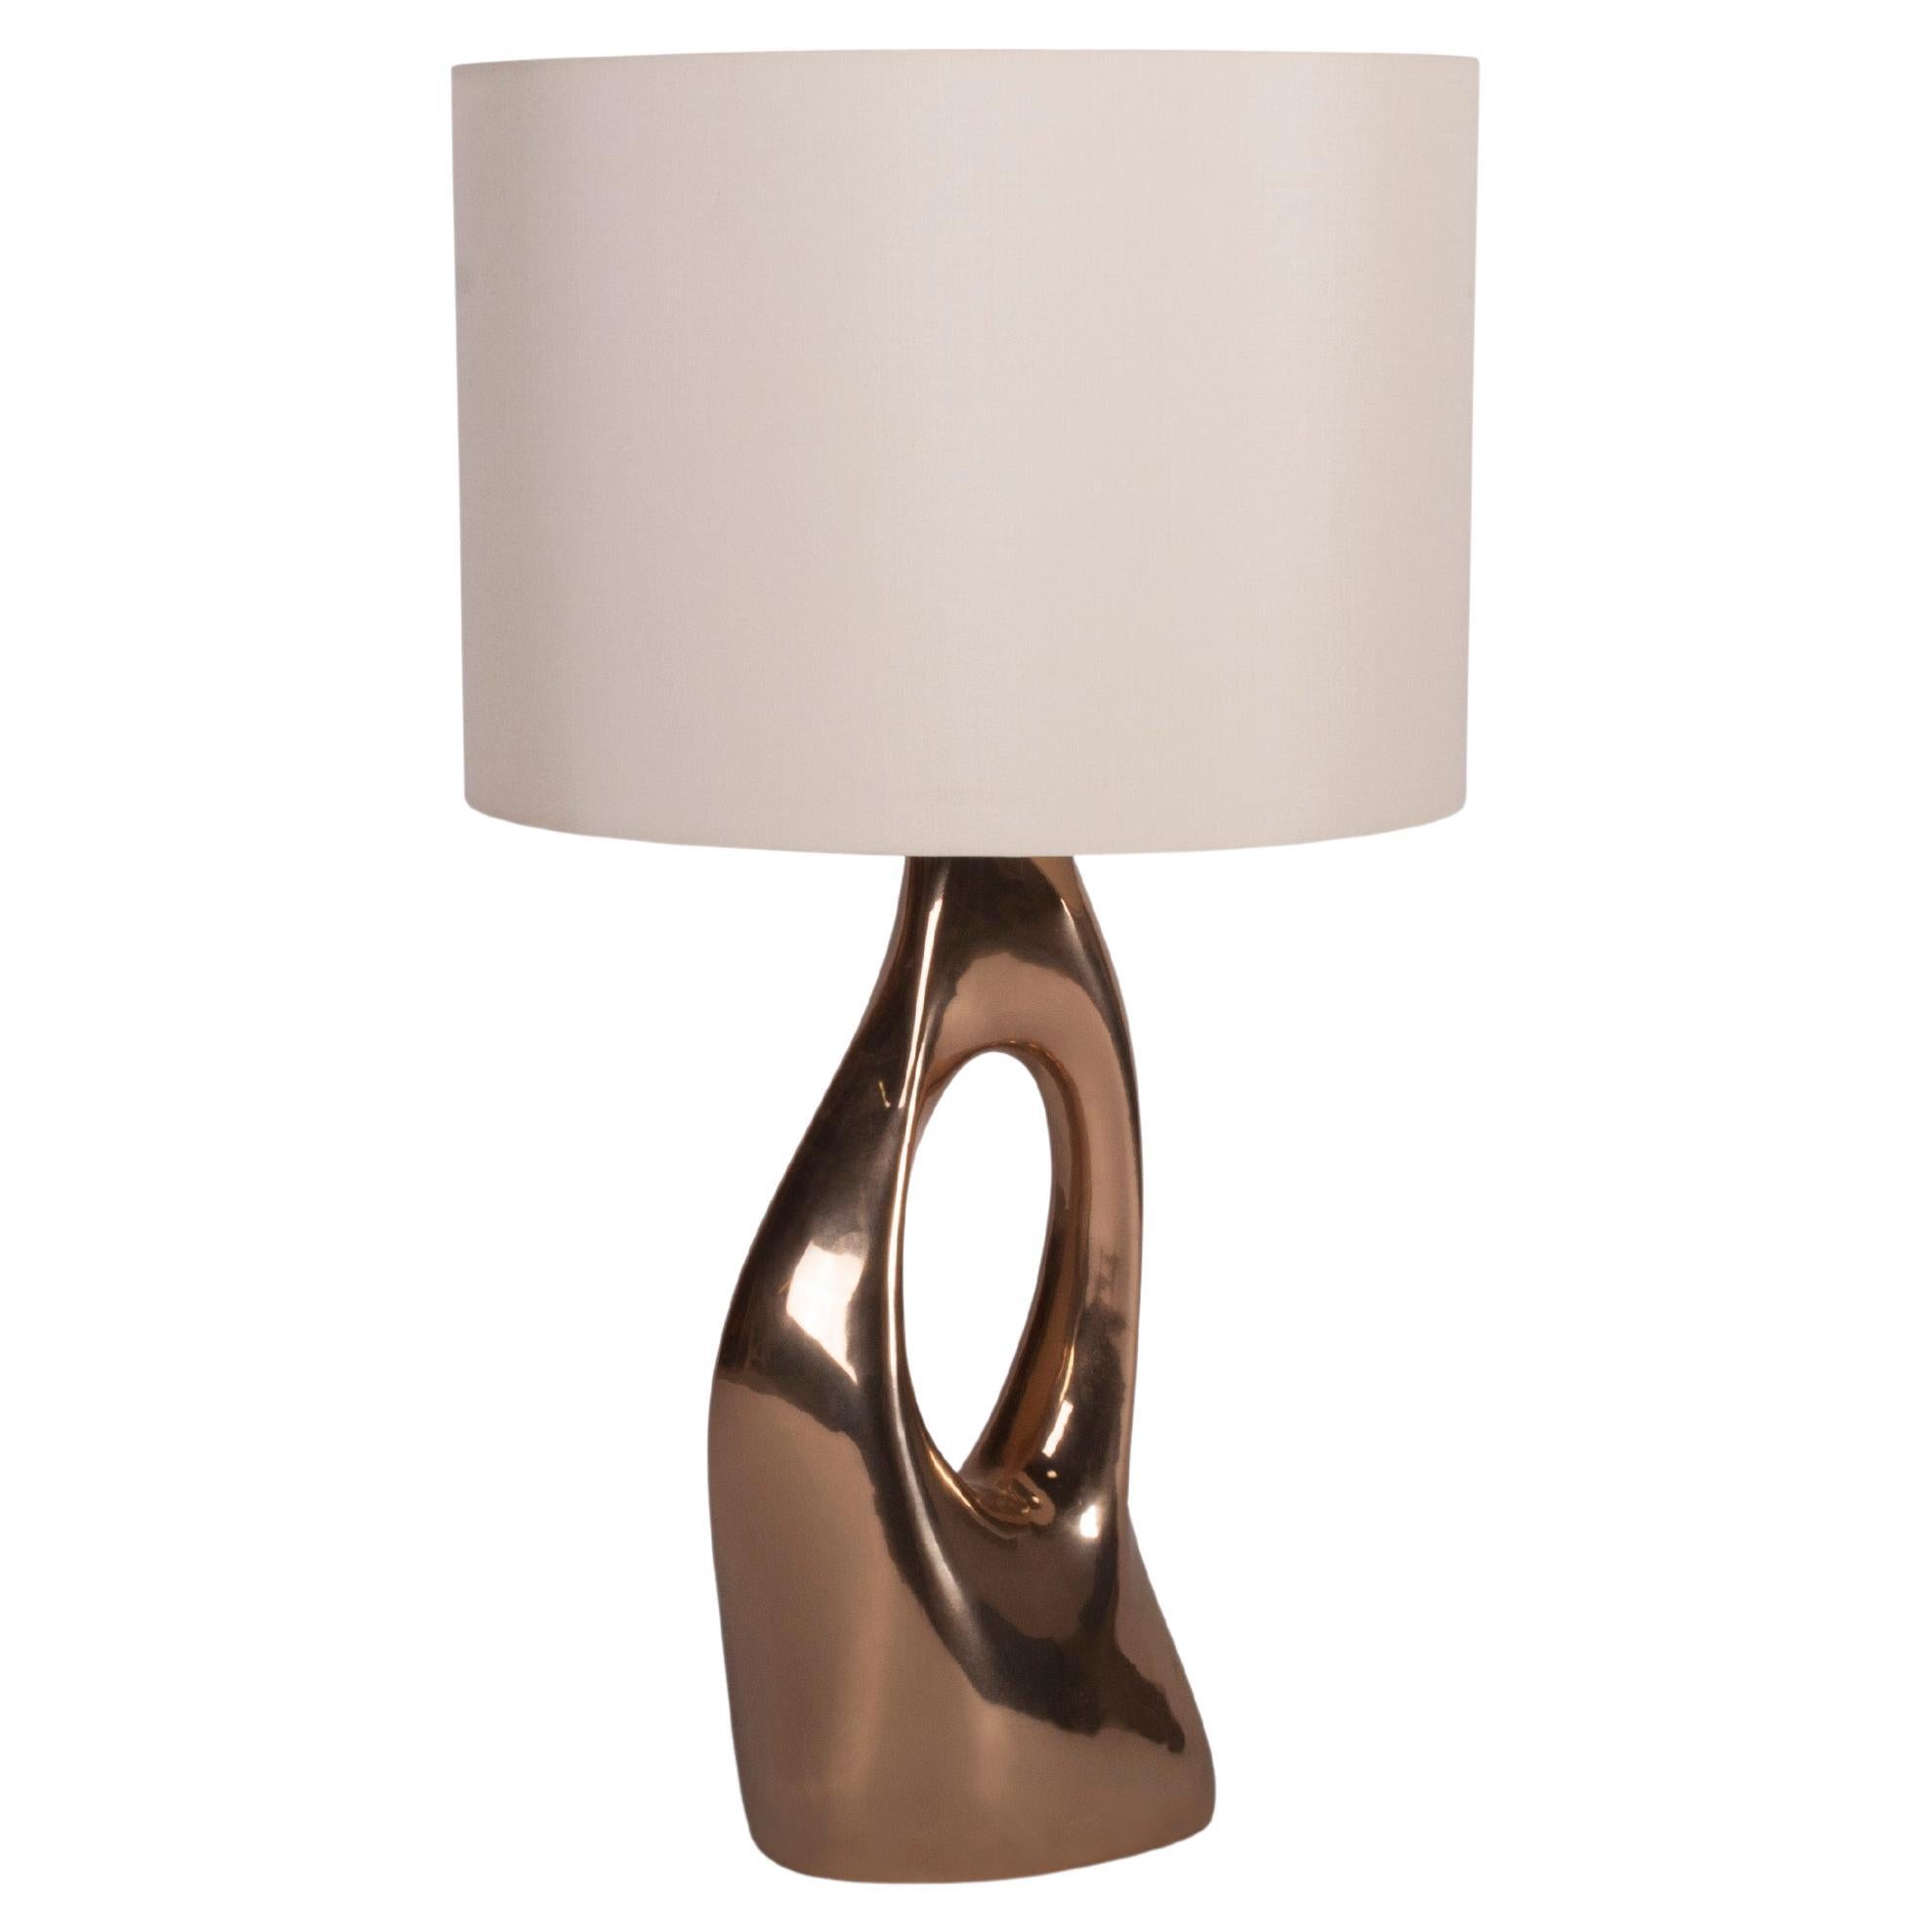 Amorph Helix Table Lamp, Casted Bronze with Ivory Silk Shade